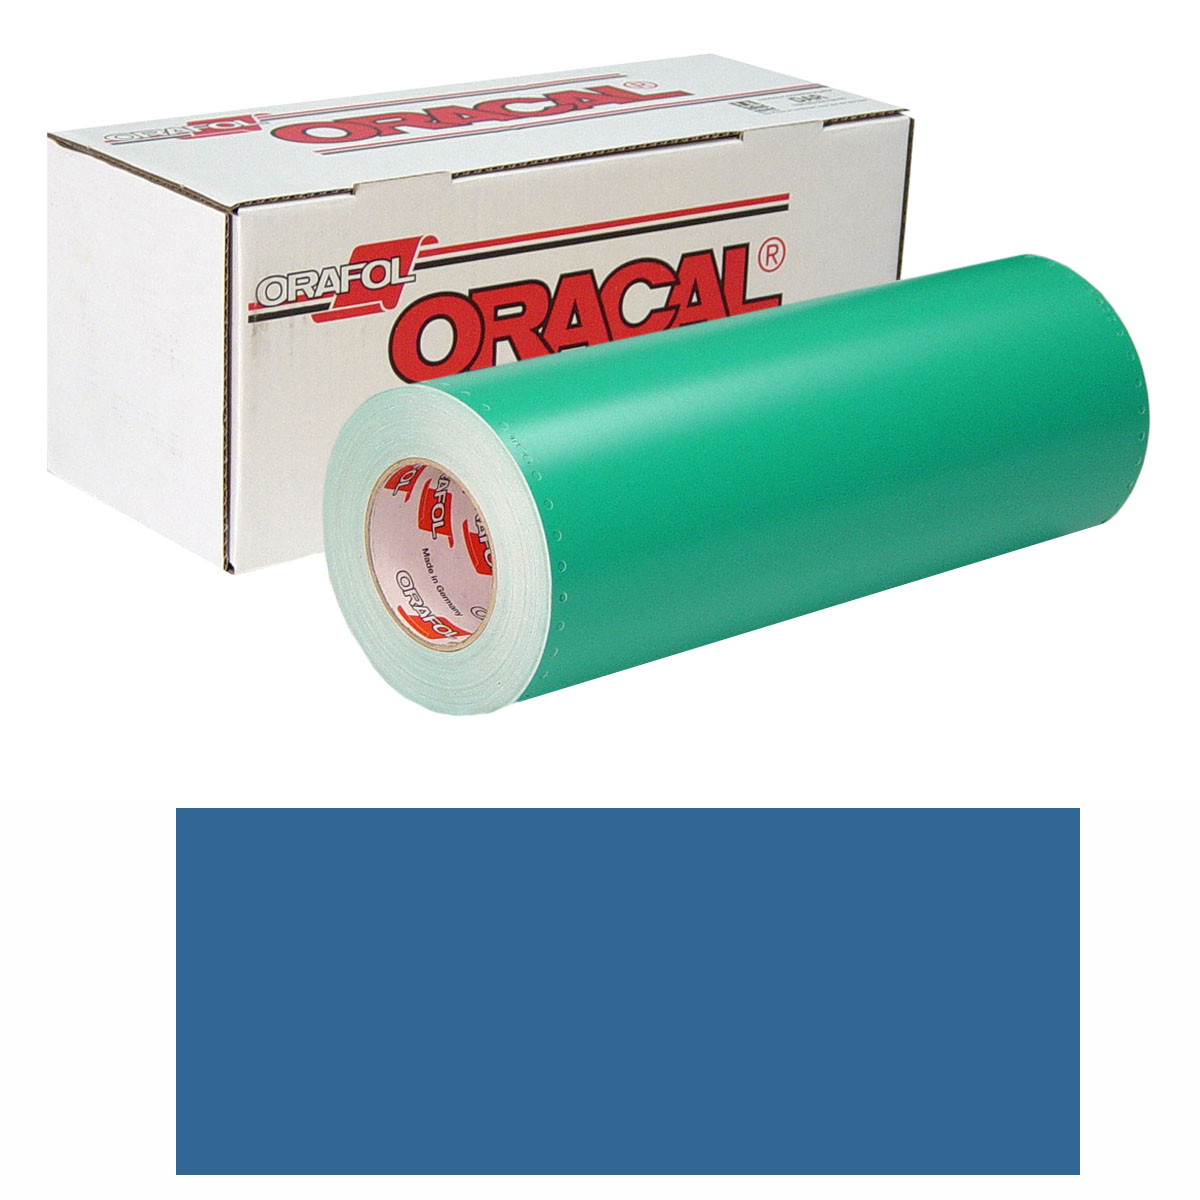 ORACAL 8500 15in X 50yd 066 Turquois Blue